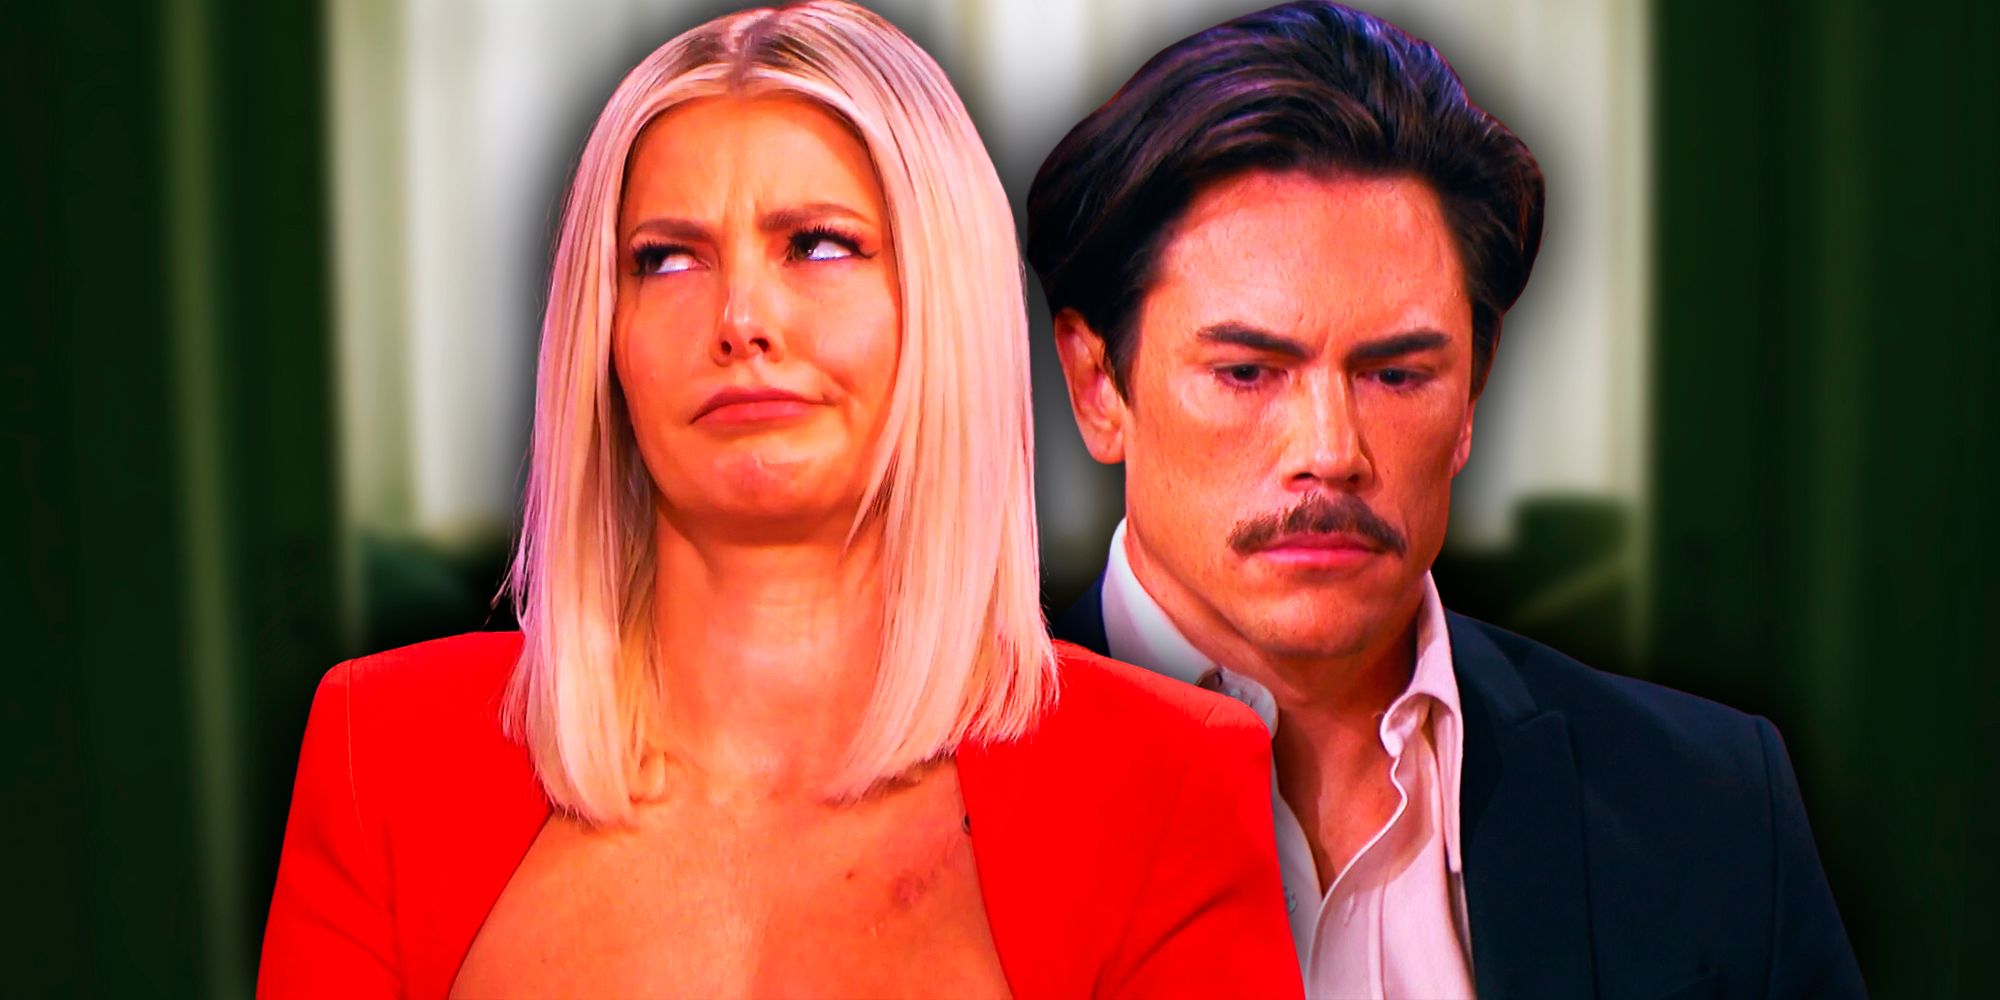 Vanderpump Rules' Ariana Madix with a questioning look and Tom Sandoval looking down